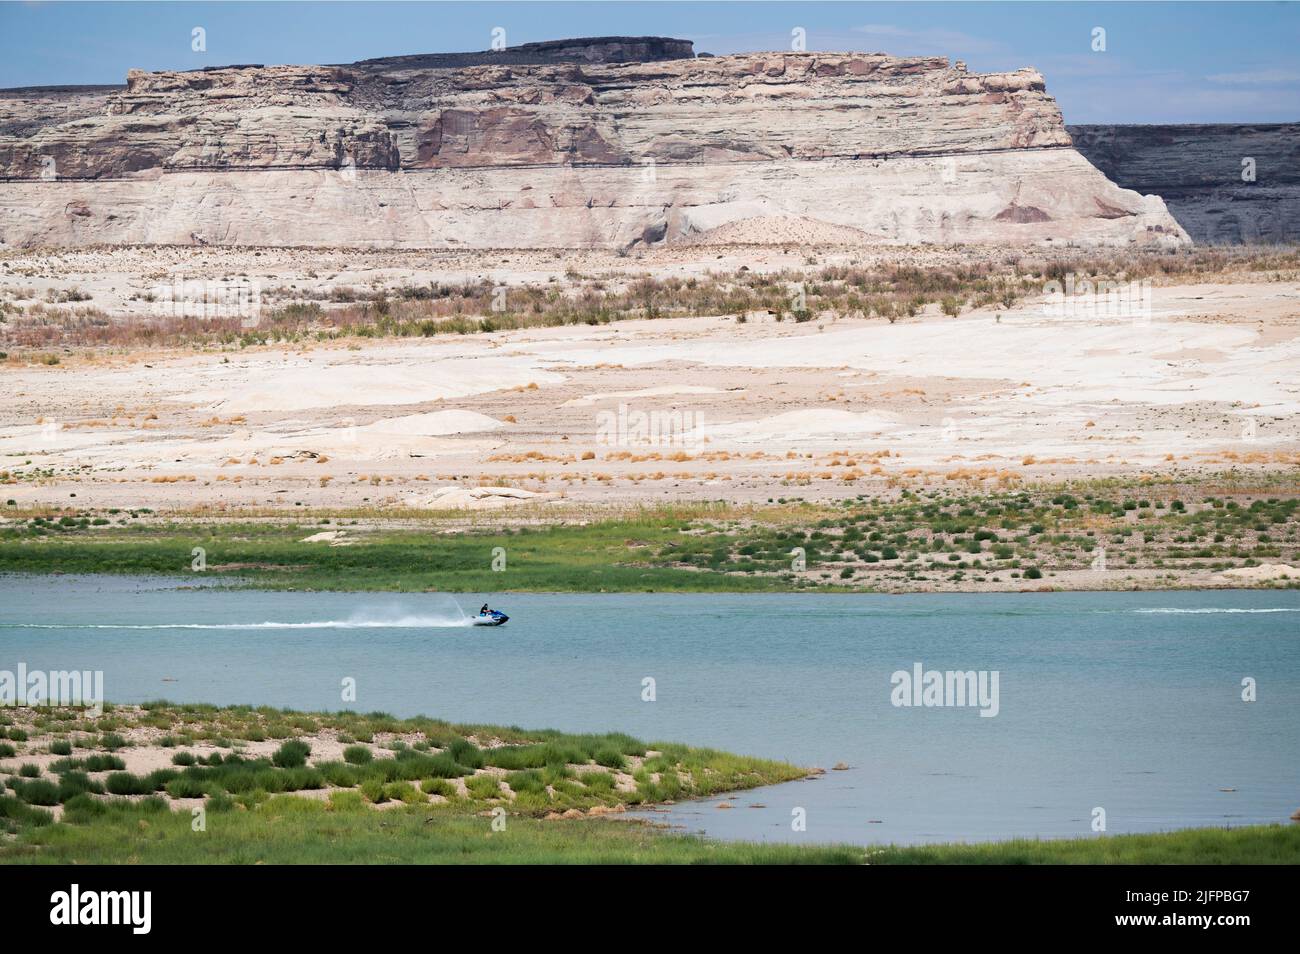 June 30, 2022 - Glen Canyon National Recreation Area, Utah, U.S. - A person rides his personal watercraft near an area of Lake Powell that used to be underwater that is now nearly dry at Lone Rock Beach on June 30, 2022 in Big Water, Utah. As severe drought grips parts of the Western United States, water levels at Lake Powell have dropped to their lowest levels since the lake was created by damming the Colorado River in 1963. The Colorado River Basin connects Lake Powell and Lake Mead and supplies water to 40 million people in seven western states. (Credit Image: © David Becker/ZUMA Press Wire Stock Photo